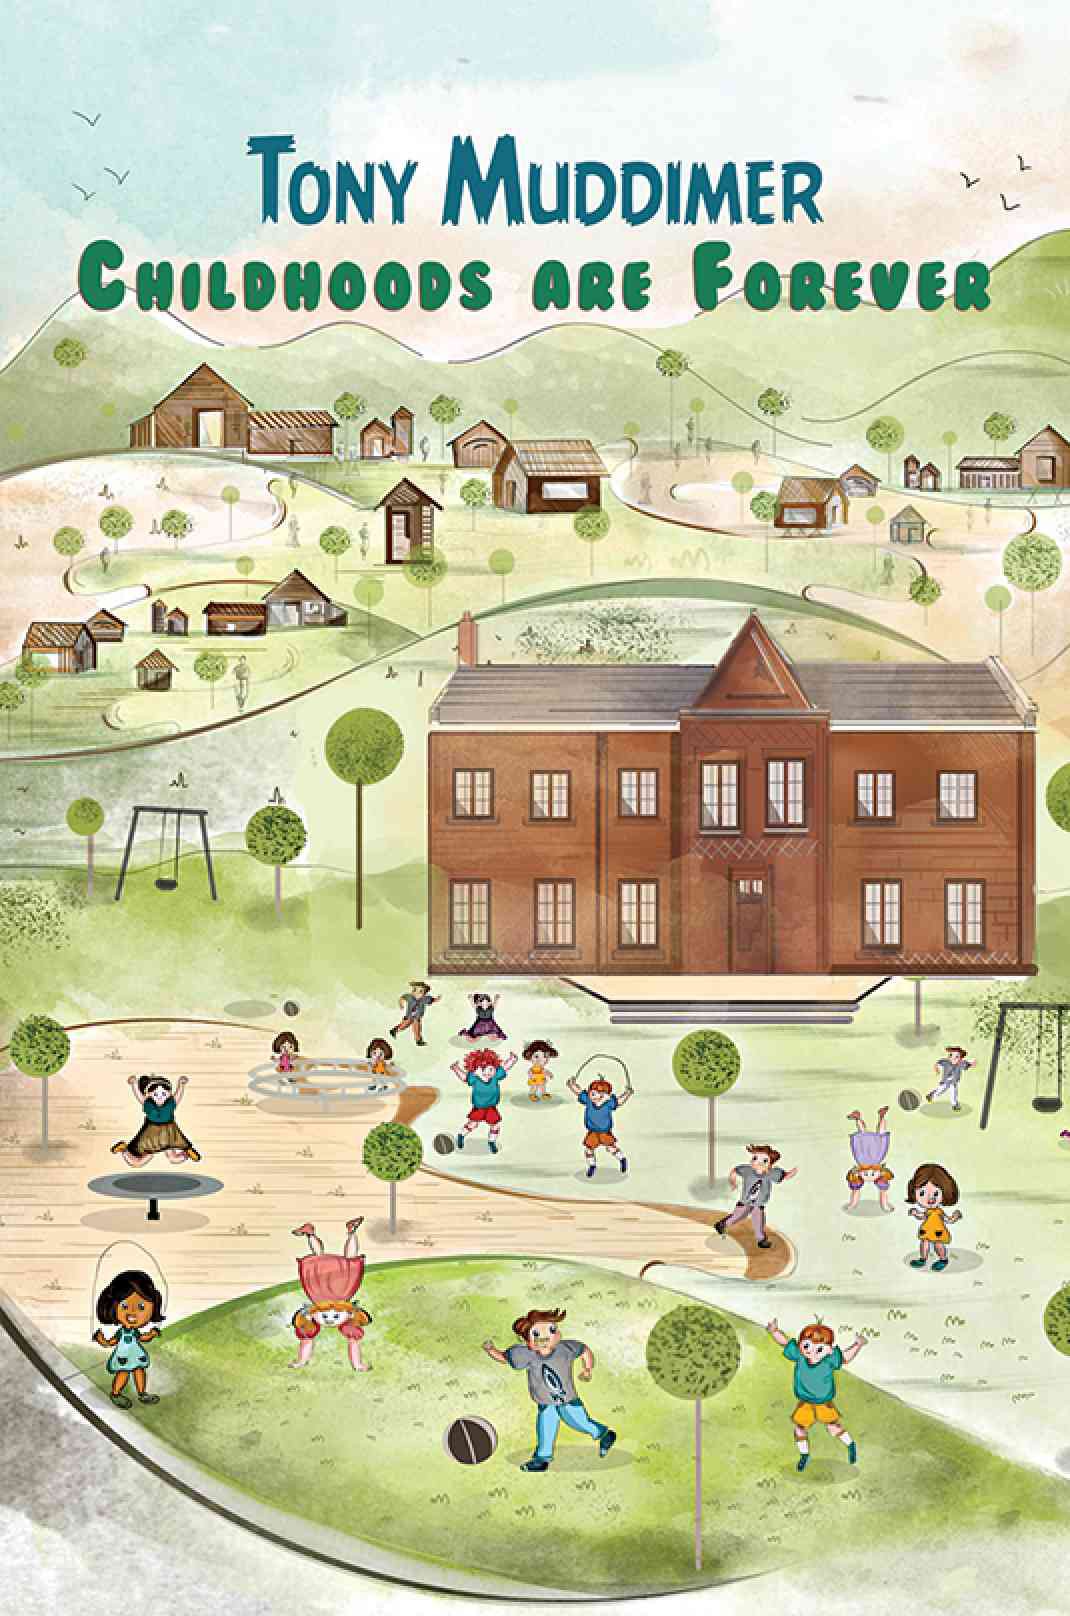 Federation of Family History Societies Reviewed Childhoods Are Forever by Tony Muddimer